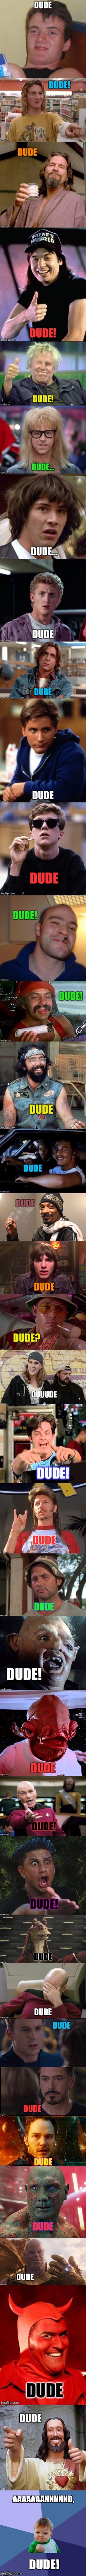 Dudes.  (Inspired by the multi-panel memes of giveuahint and reallyitsjohn!) | A | image tagged in dudes,pop culture,funny memes | made w/ Imgflip meme maker